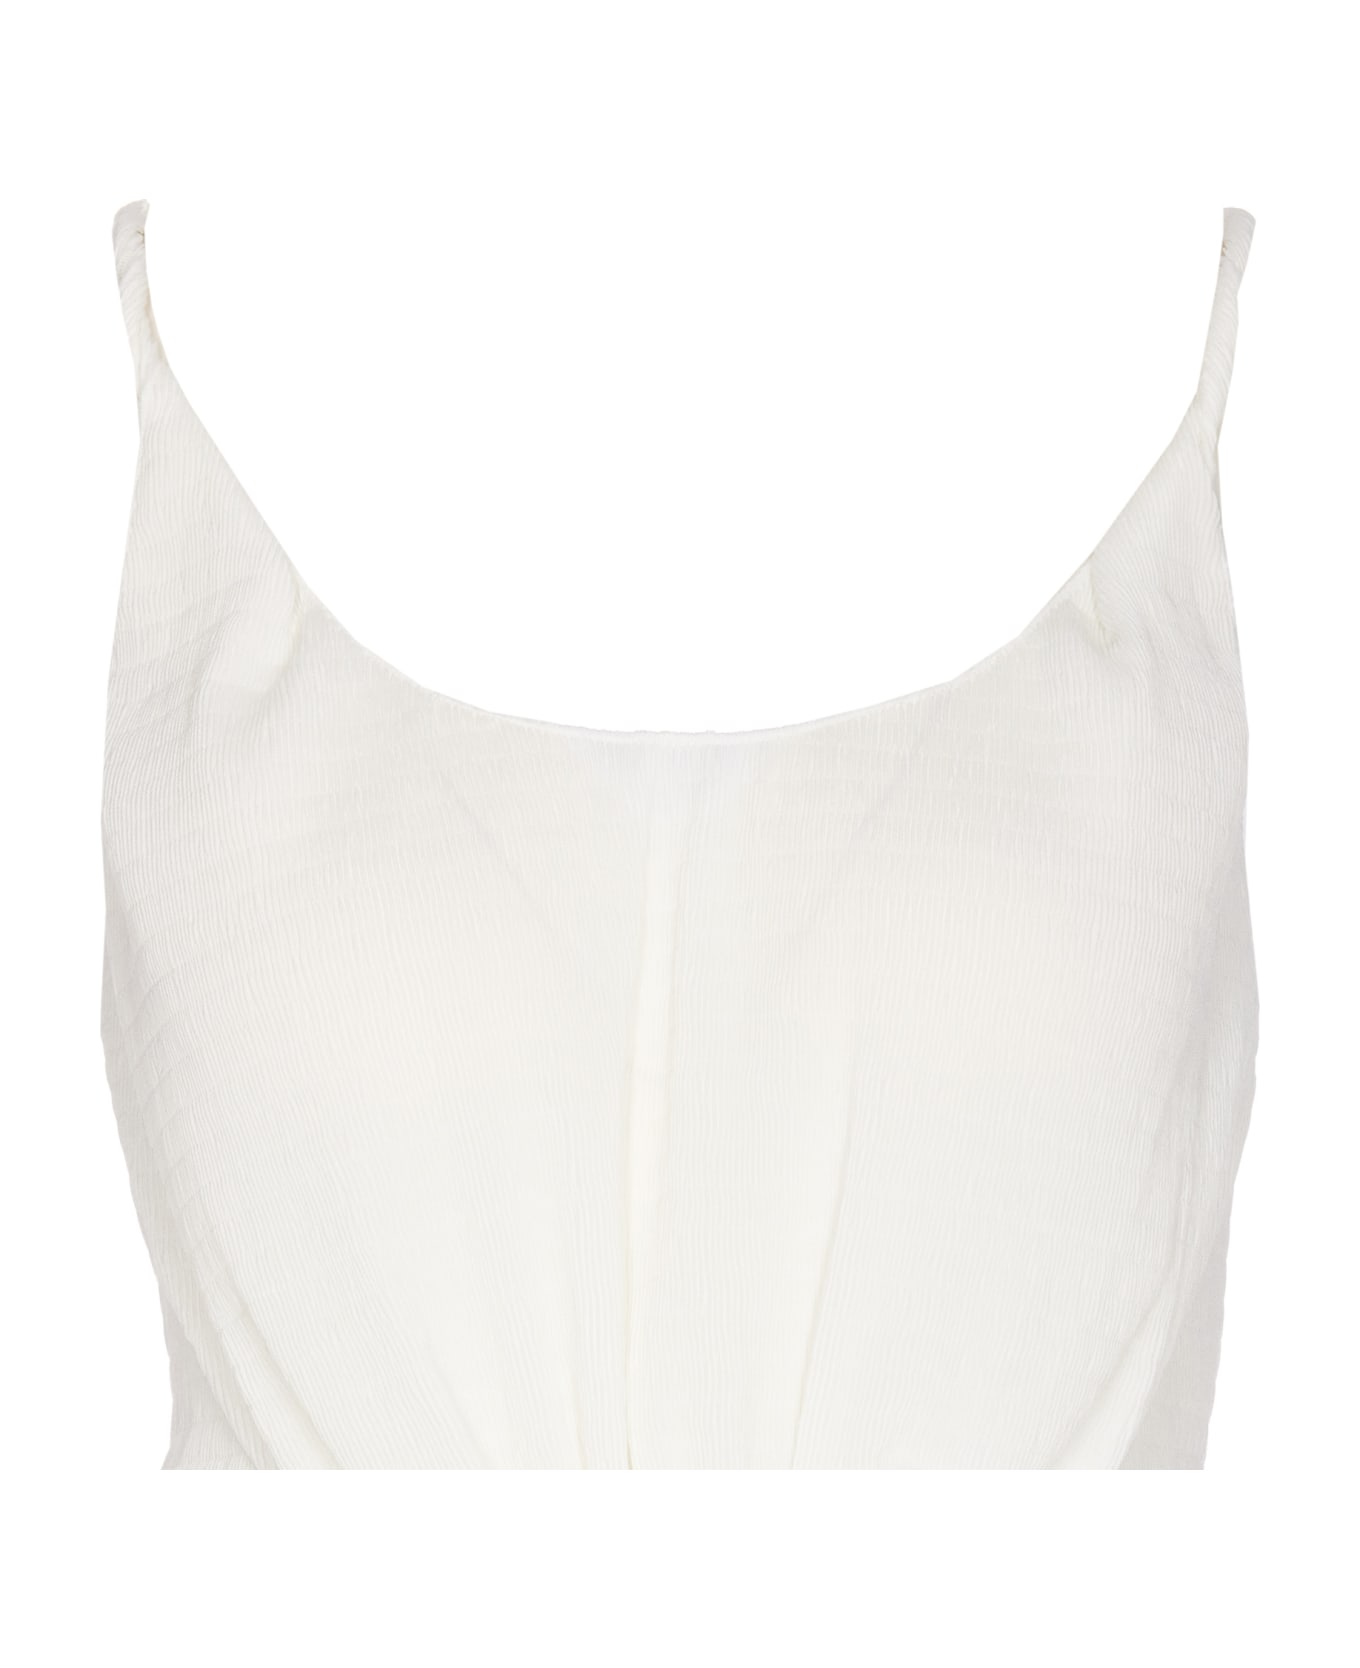 J.W. Anderson Knot Front Strap Top - White トップス